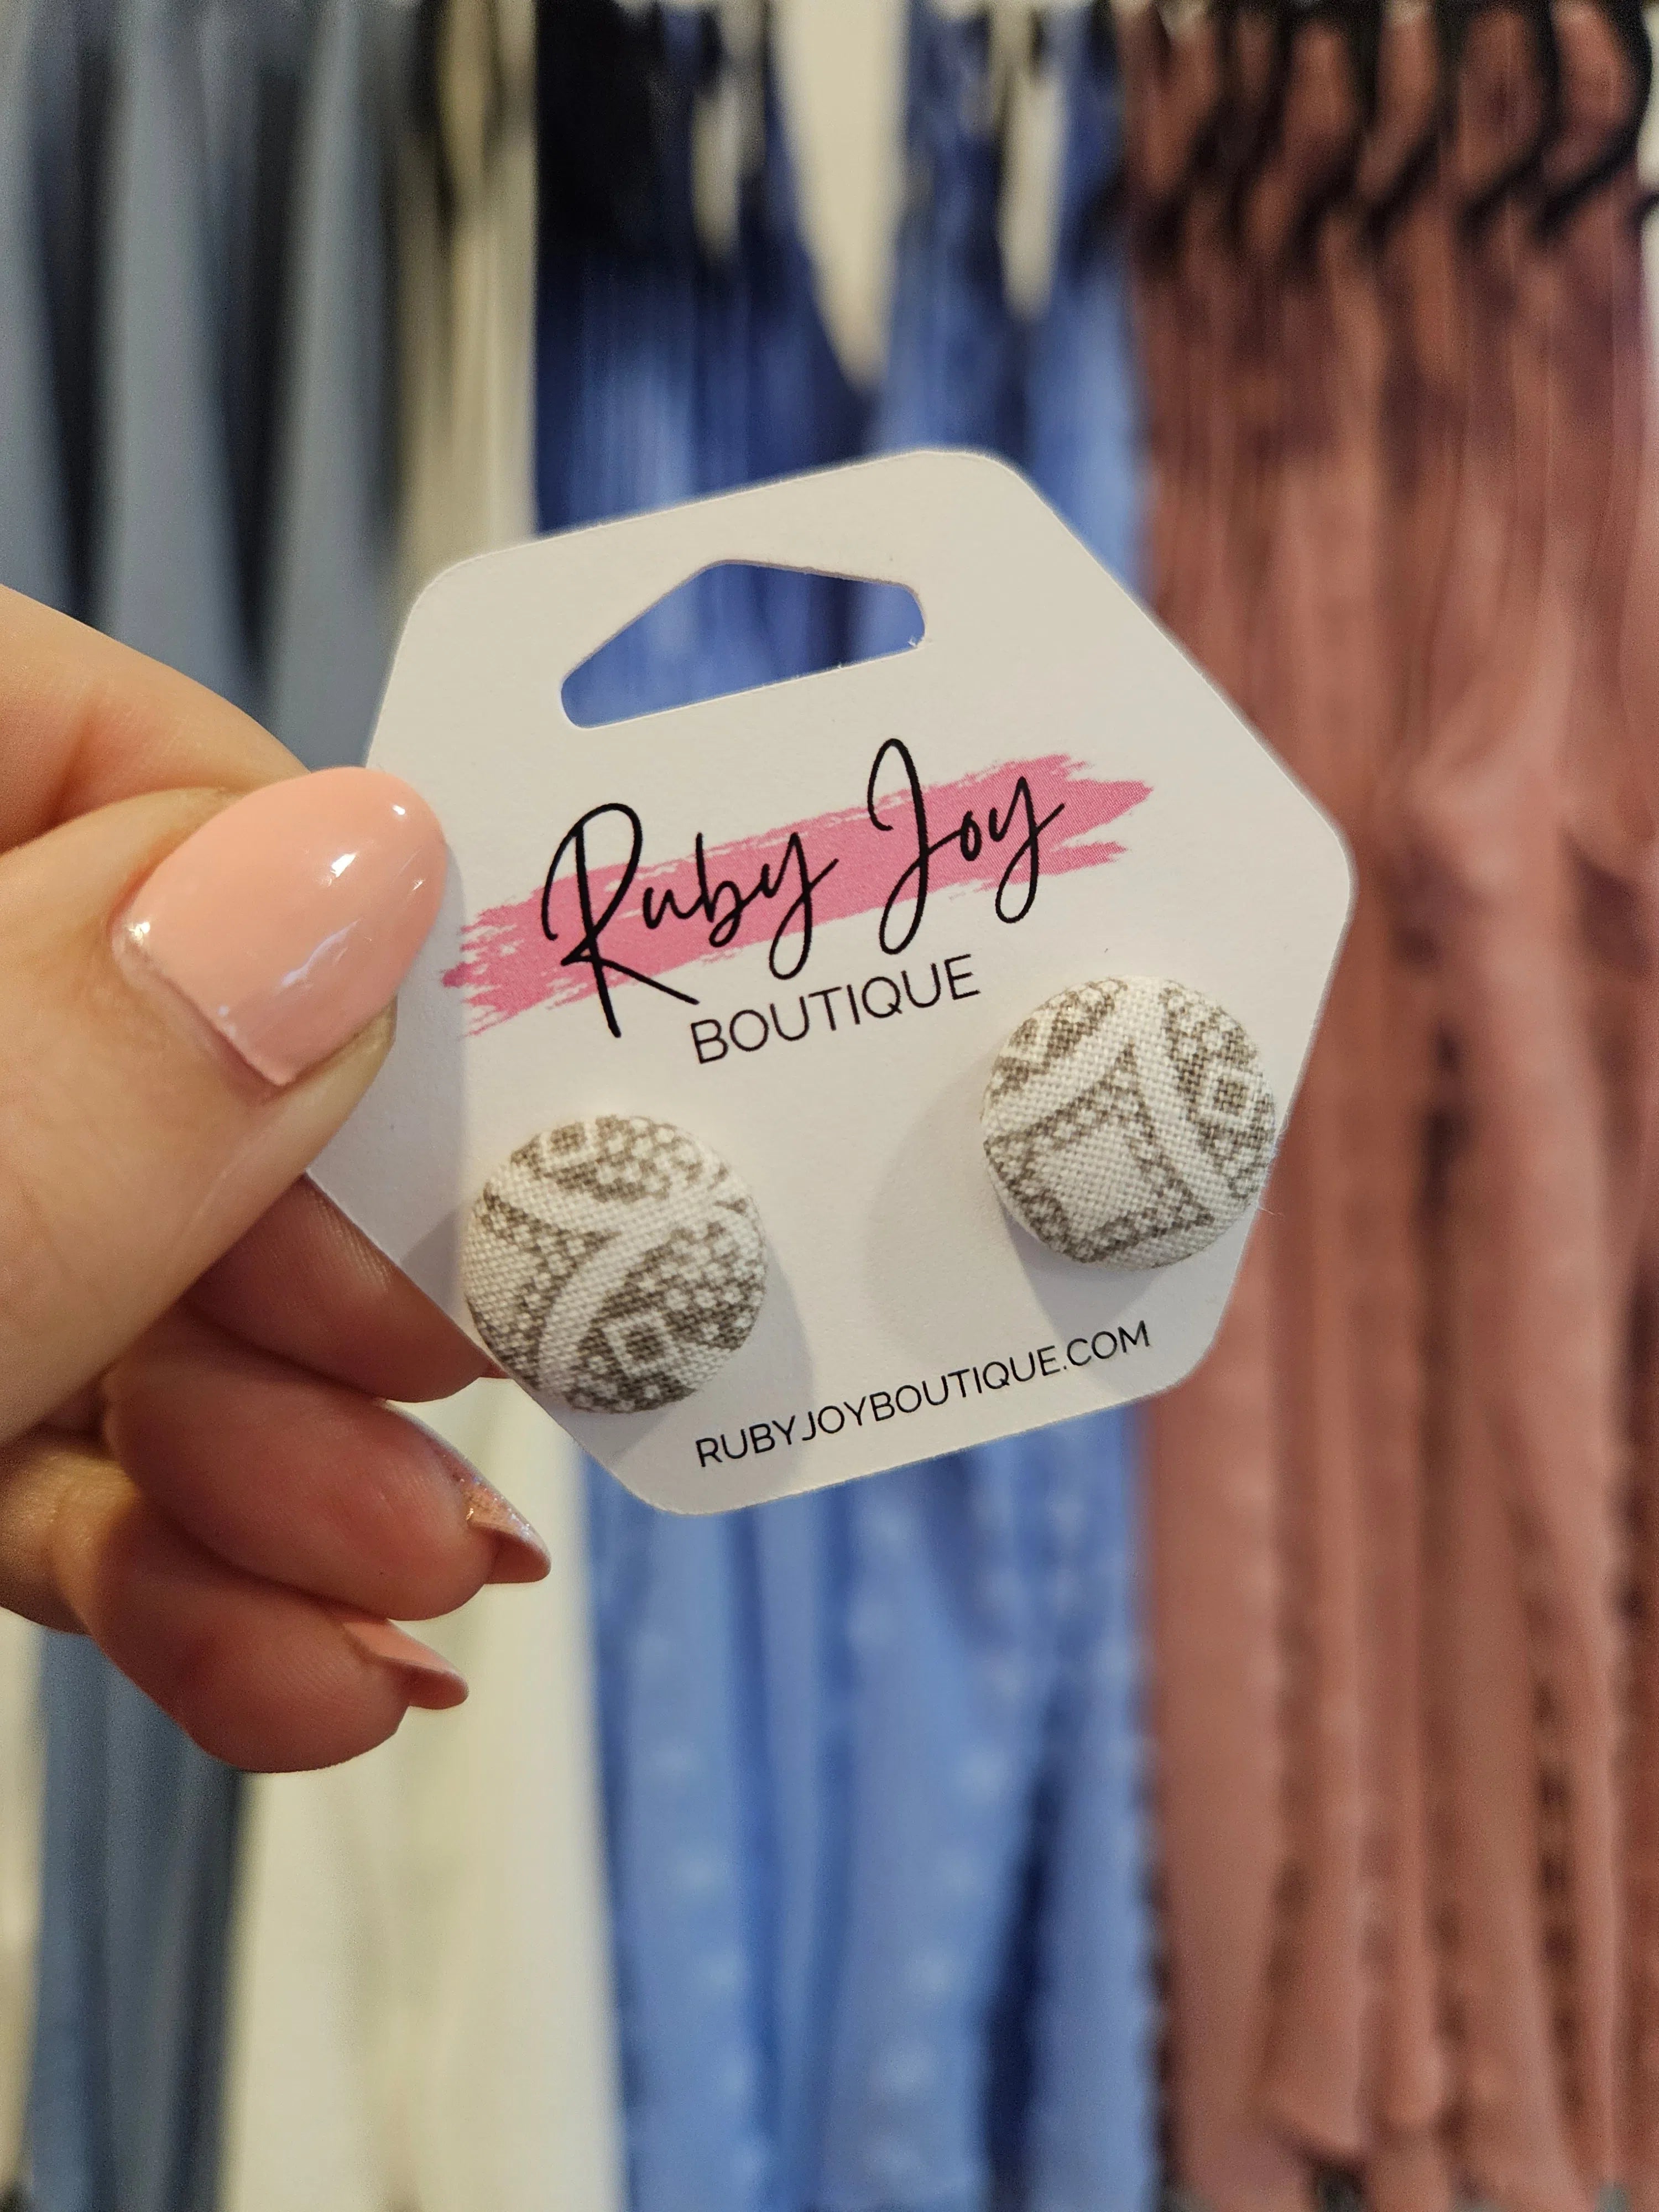 Shop Fabric Covered Button Earrings-Earrings at Ruby Joy Boutique, a Women's Clothing Store in Pickerington, Ohio